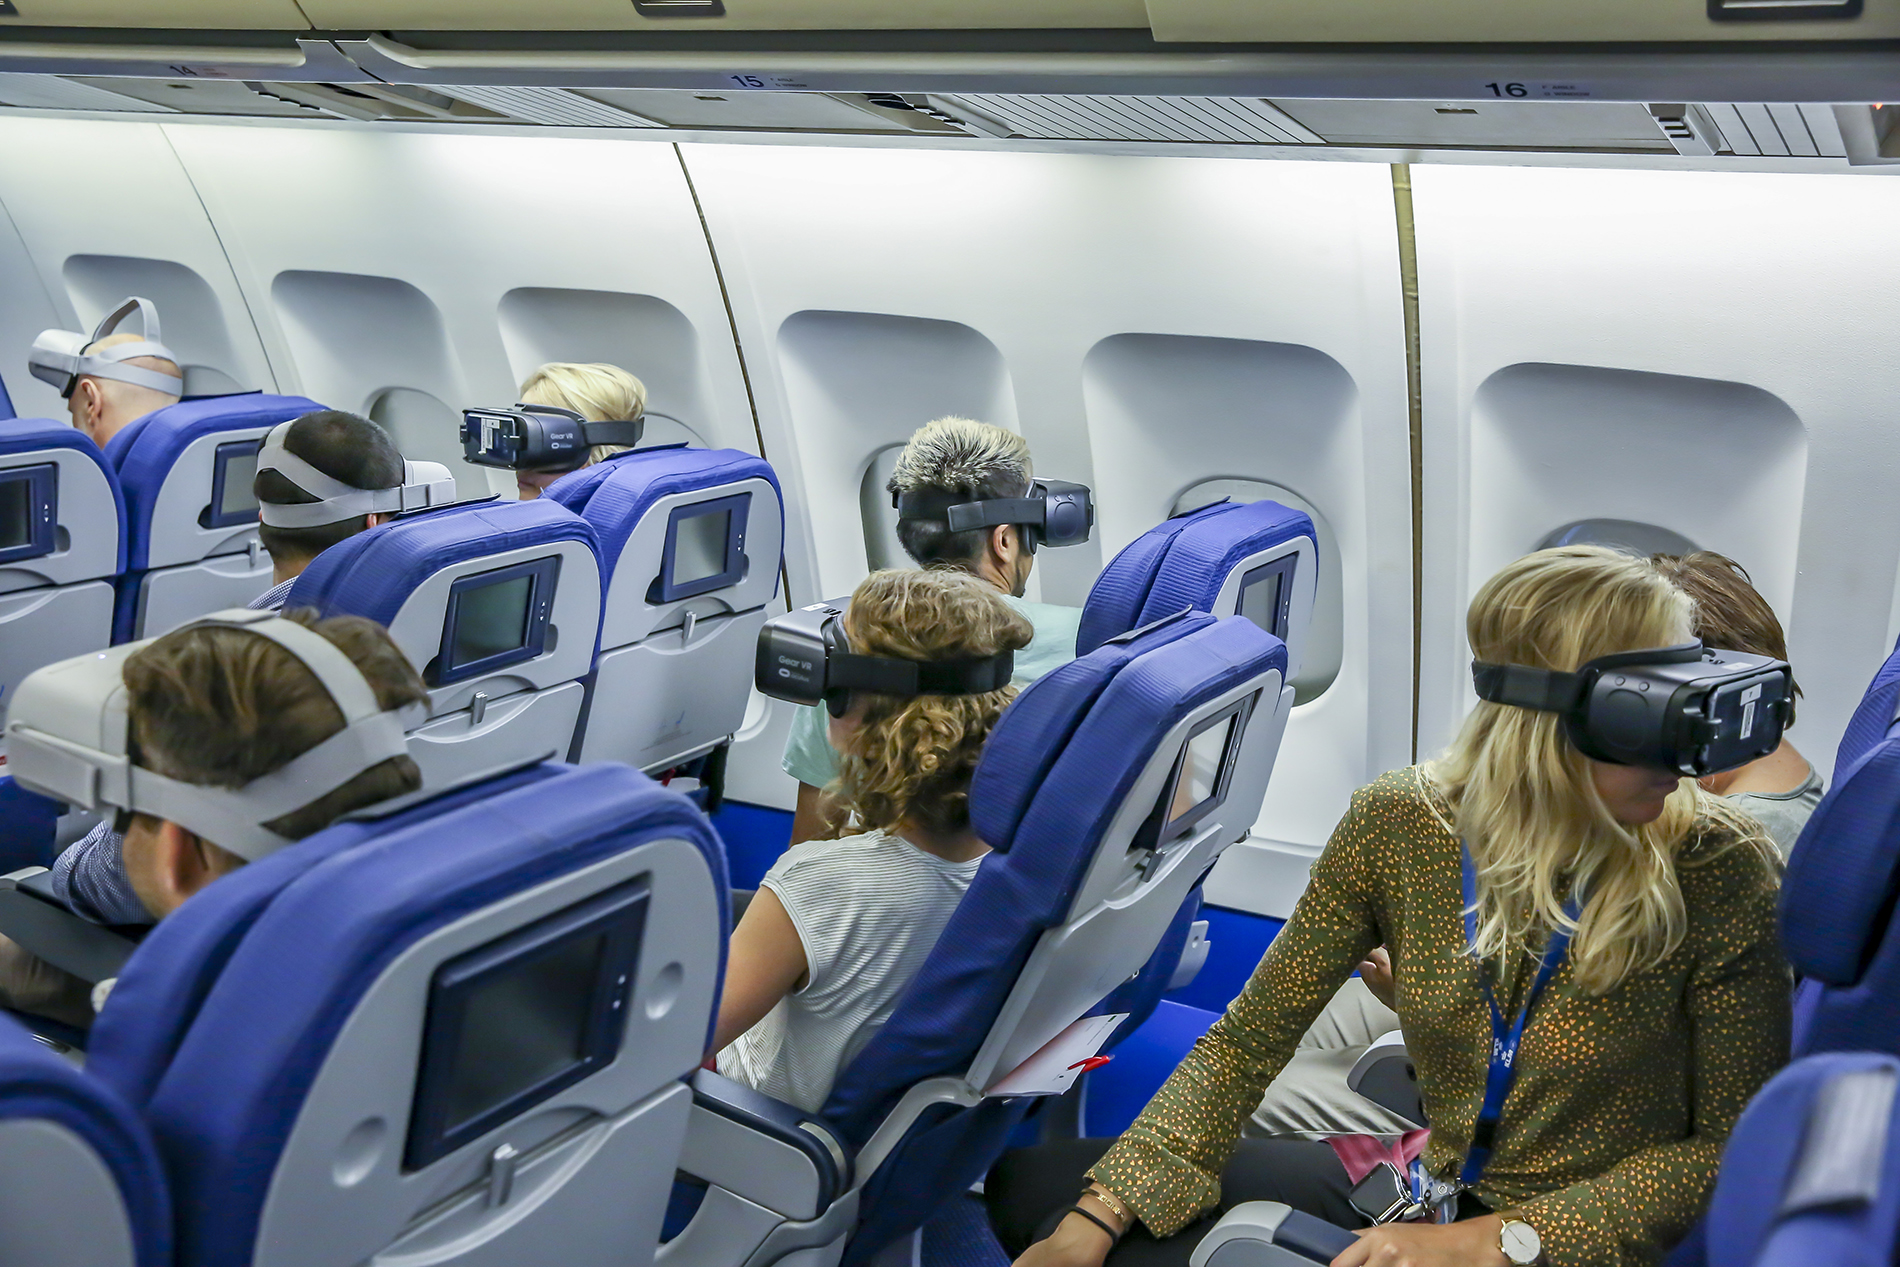 KLM and NLR test effects of using virtual reality headsets in cabin - NLR News